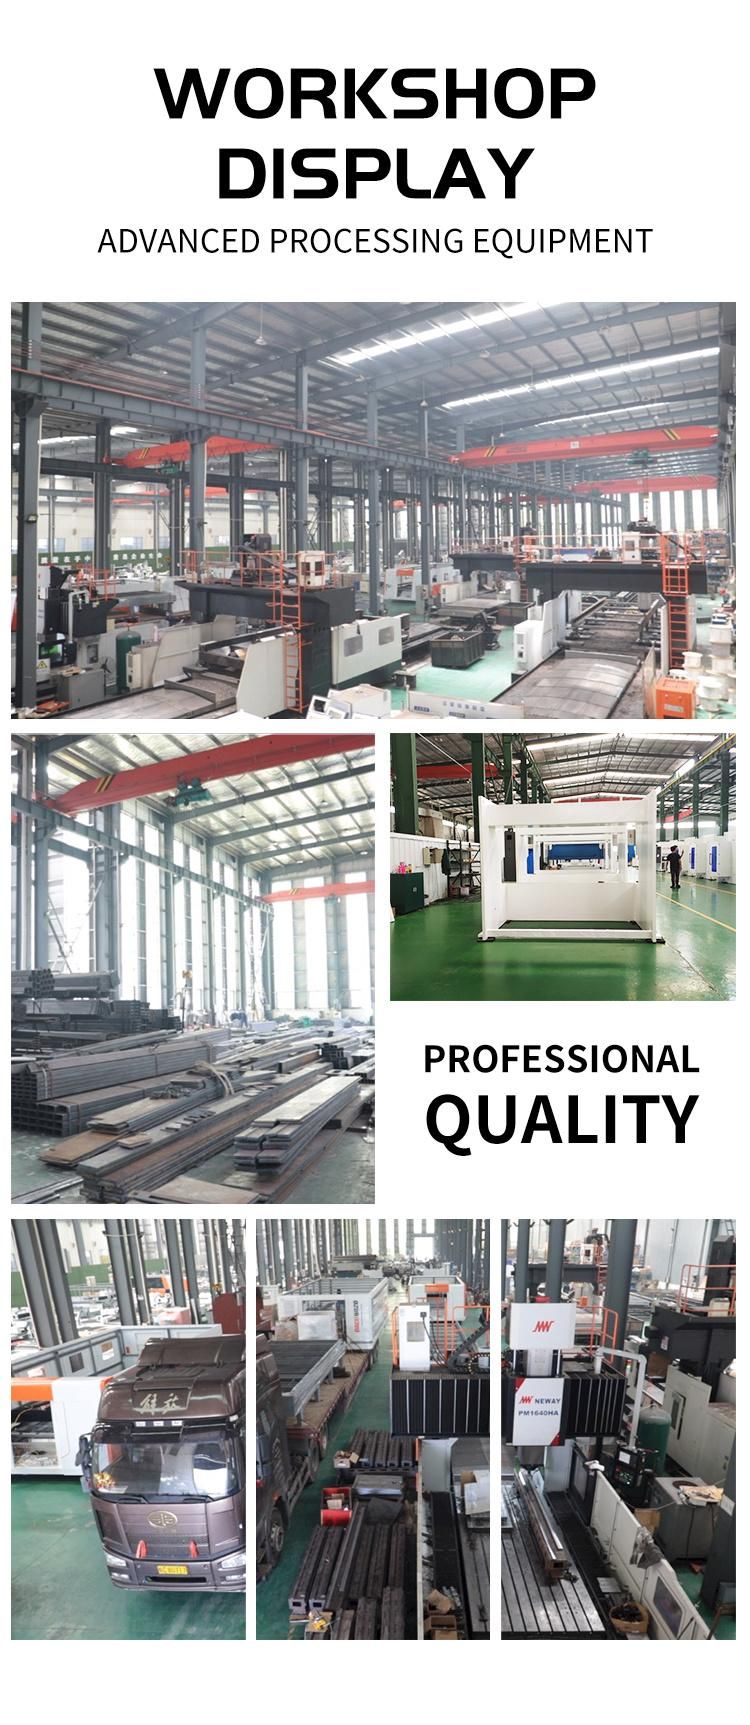 Njwg CNC Hydraulic Stainless Steel Plate Bending Machine Hydraulic Press Brake for Metal Working